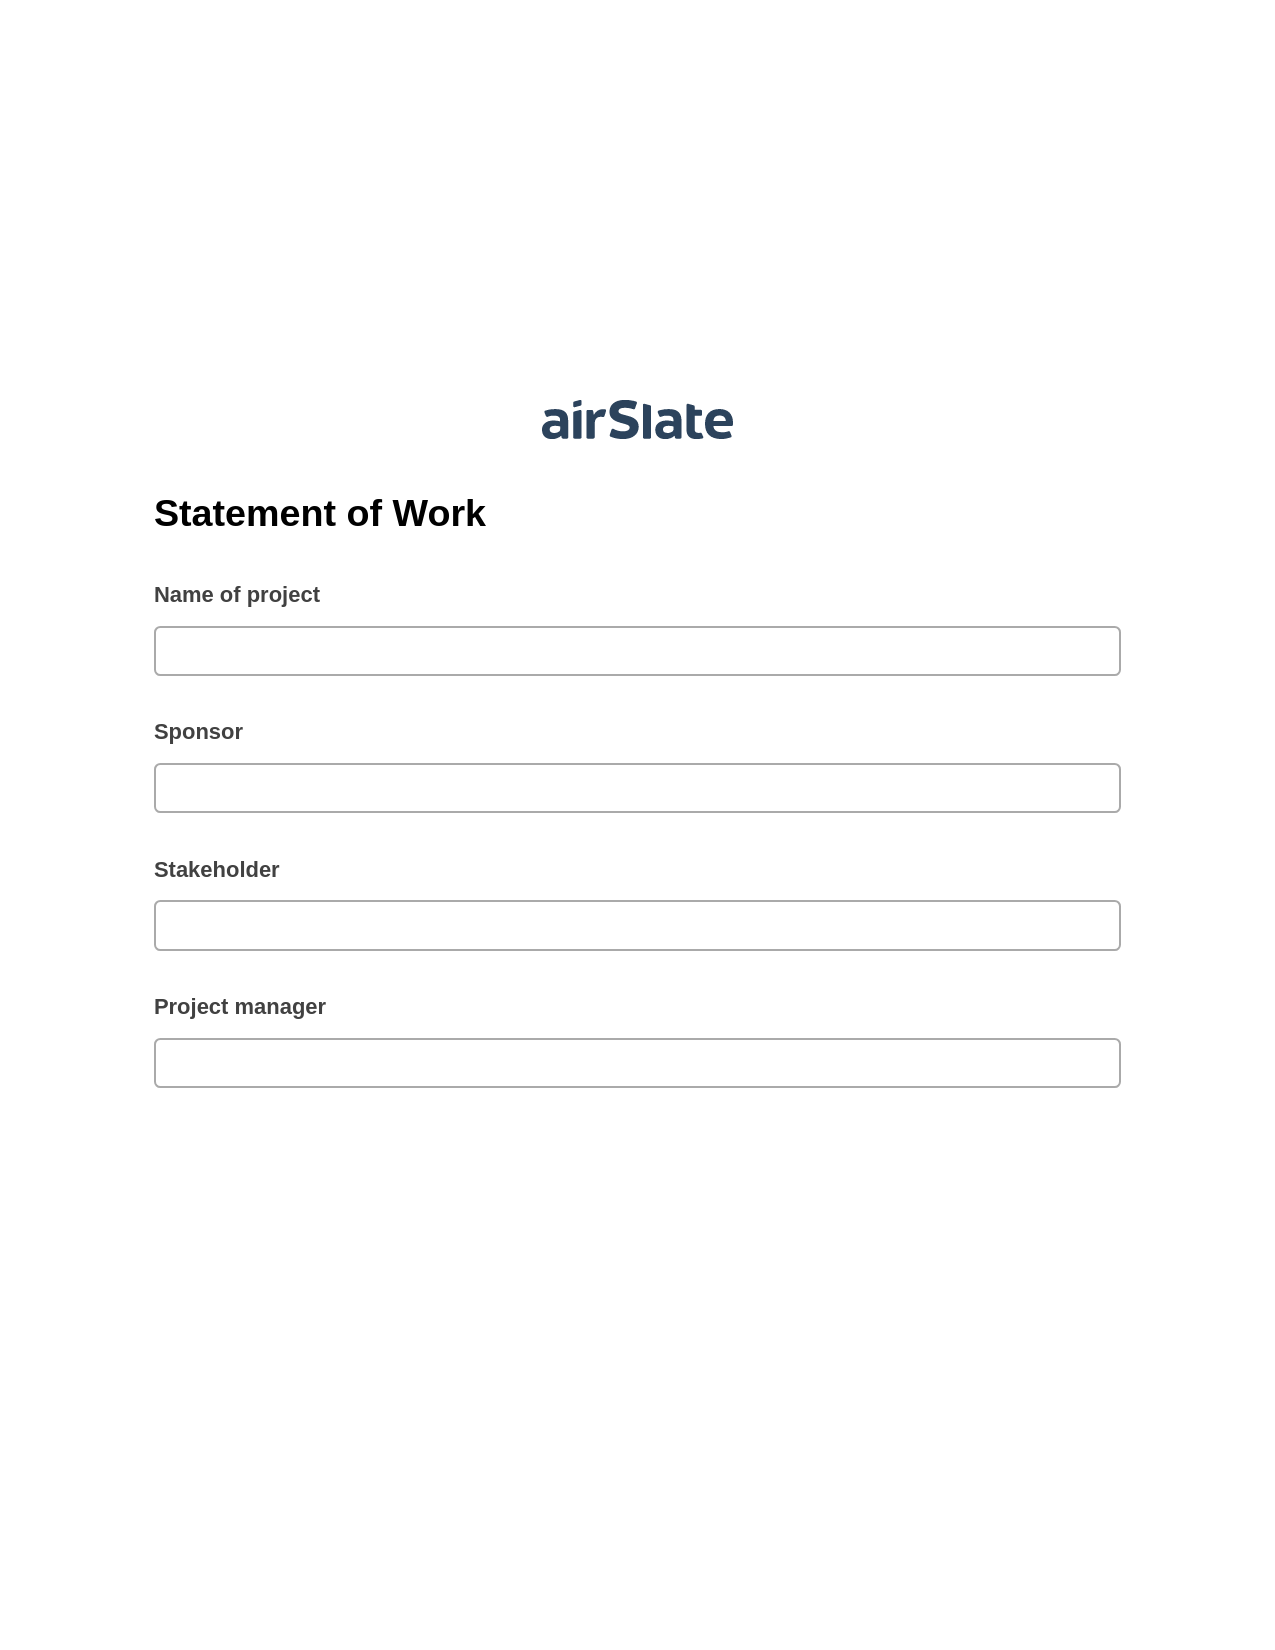 Multirole Statement of Work Pre-fill from Google Sheets Bot, Remove Tags From Slate Bot, Export to Smartsheet